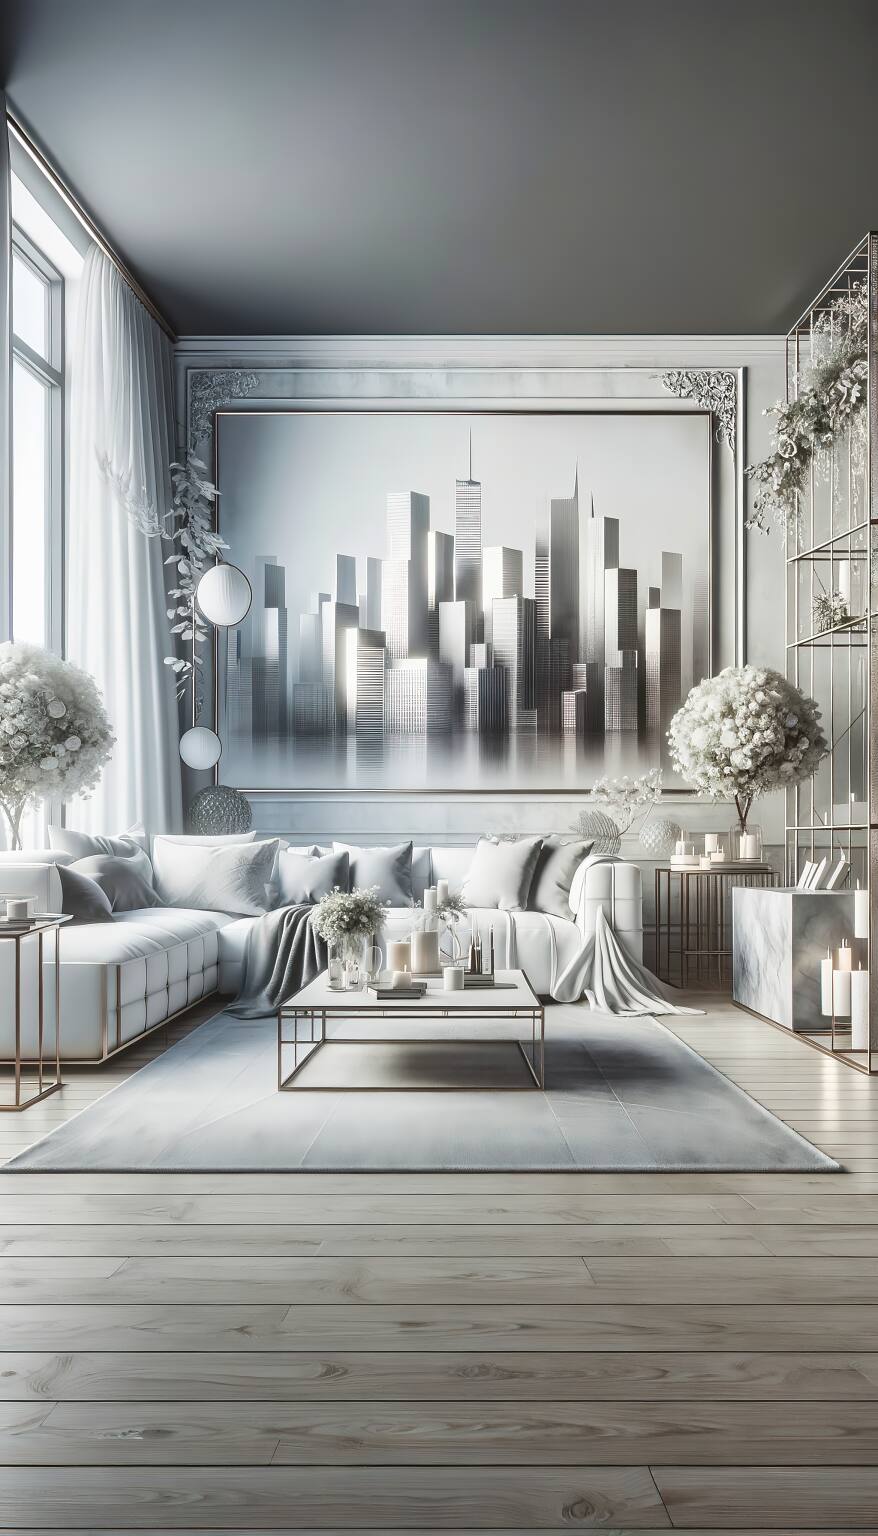 A Romantic Living Room With An Urban Chic Vibe In Sleek White And Silver, Featuring Minimalist Sofa, Contemporary Chairs, And A Modern Coffee Table, Set In A Stylish, Contemporary Ambiance.